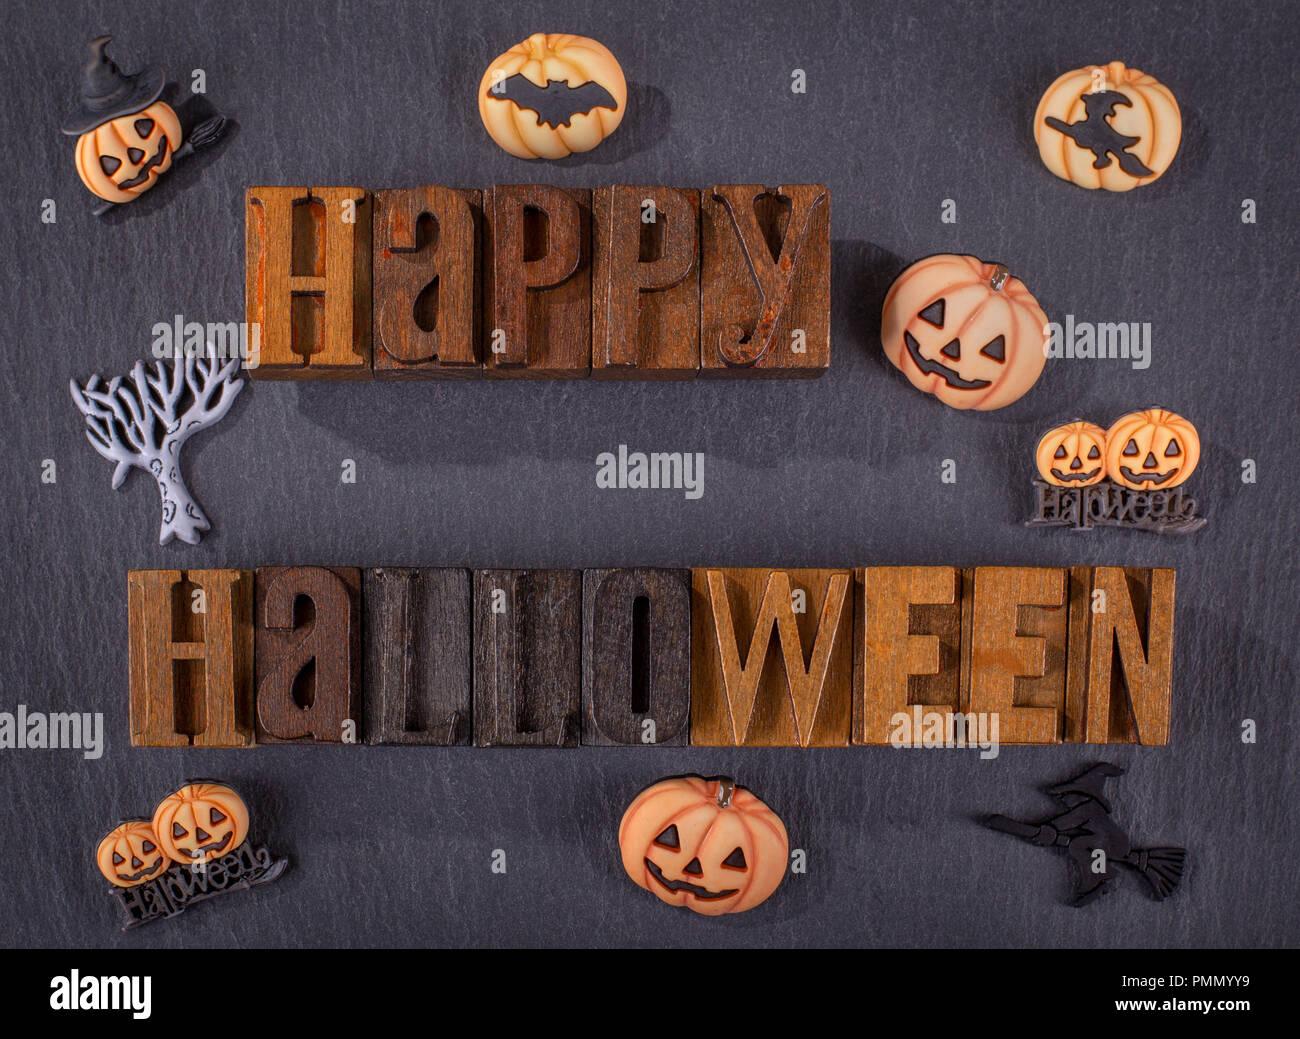 Happy Halloween wooden block text with pumpkin icons on a black background Stock Photo